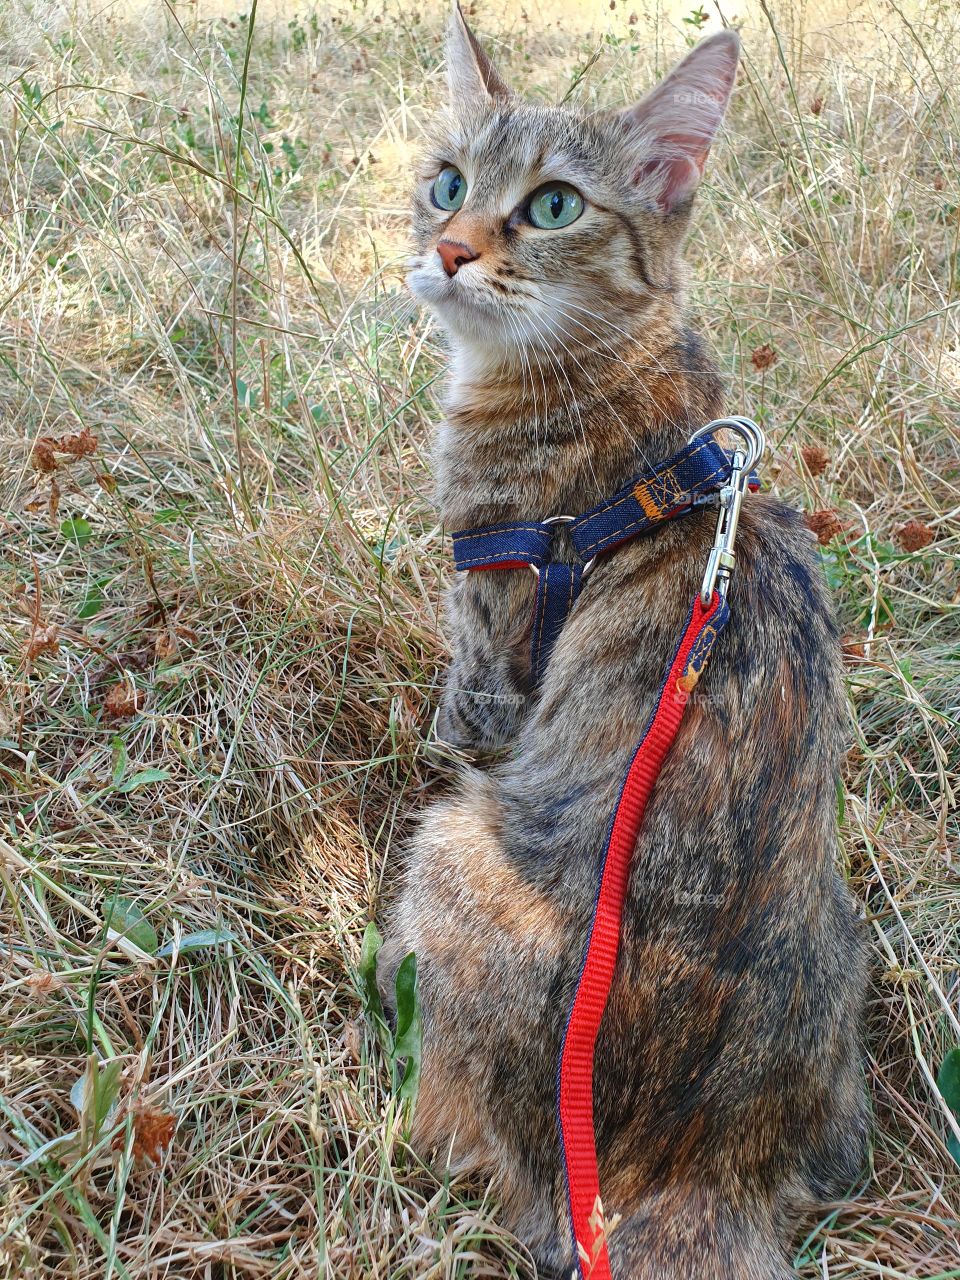 cat on a leash looking up sitting in the grass